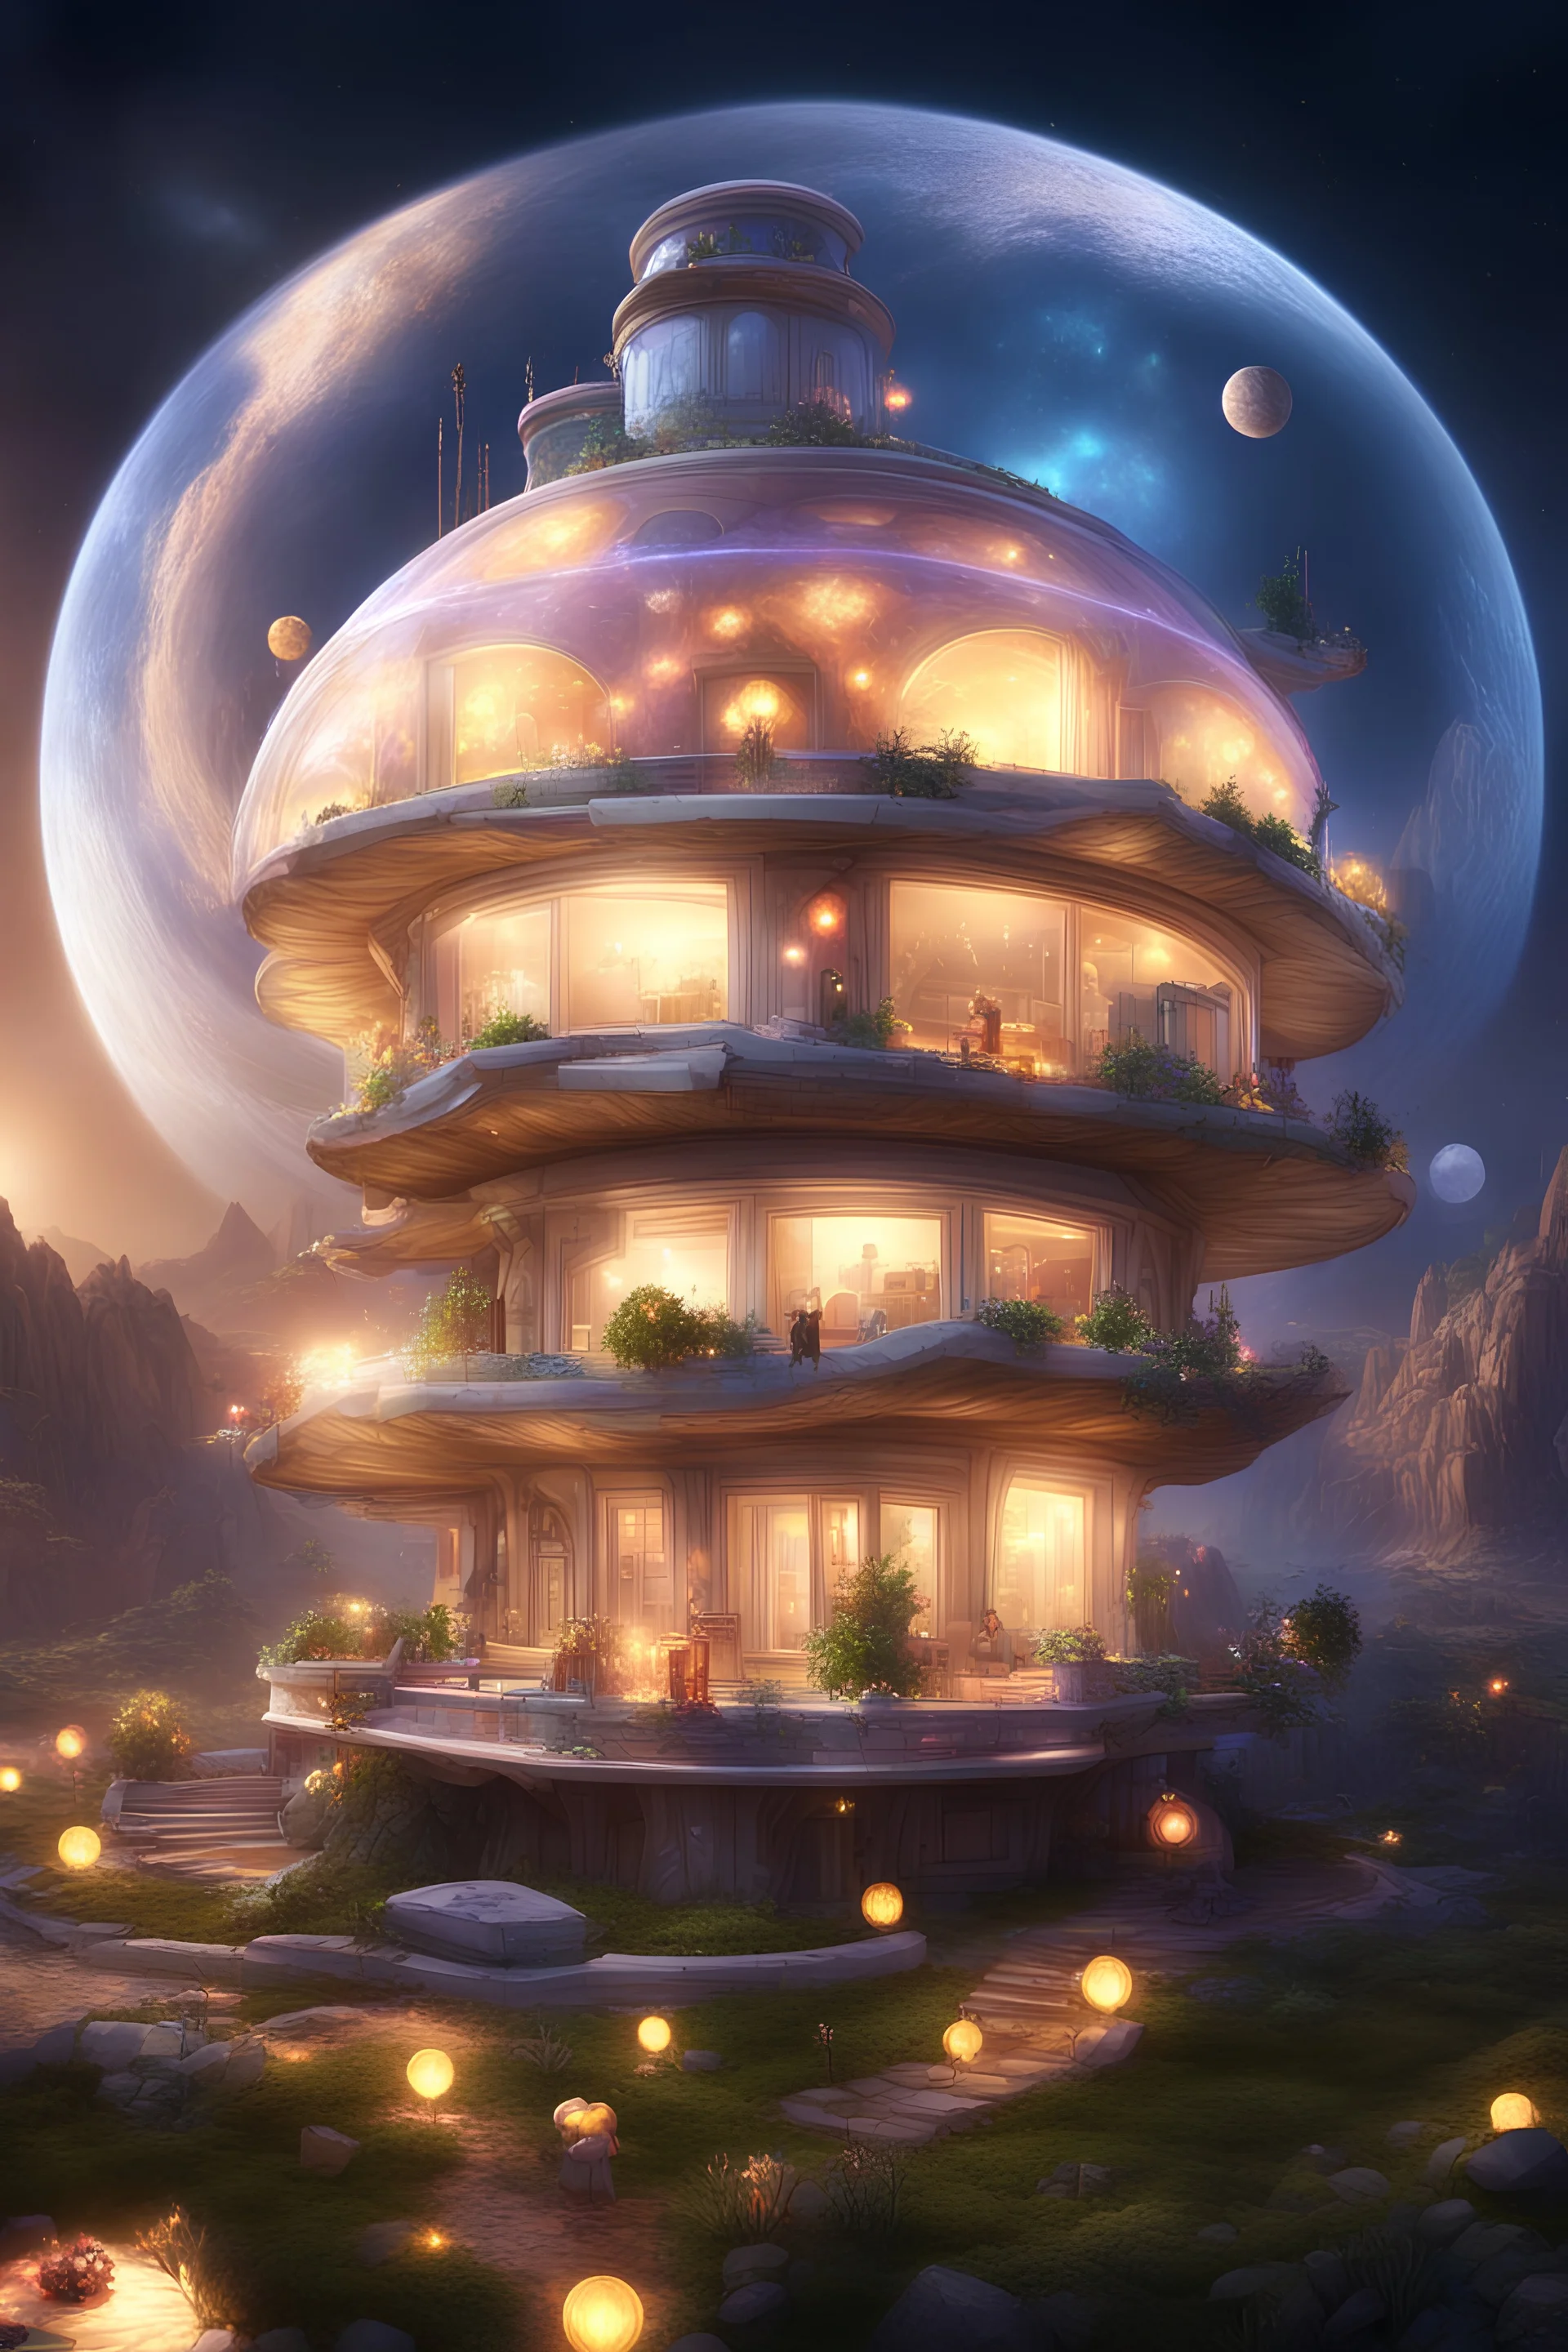 build a beautiful residence full of lights and life in Venus, strong enough to protect the people in it